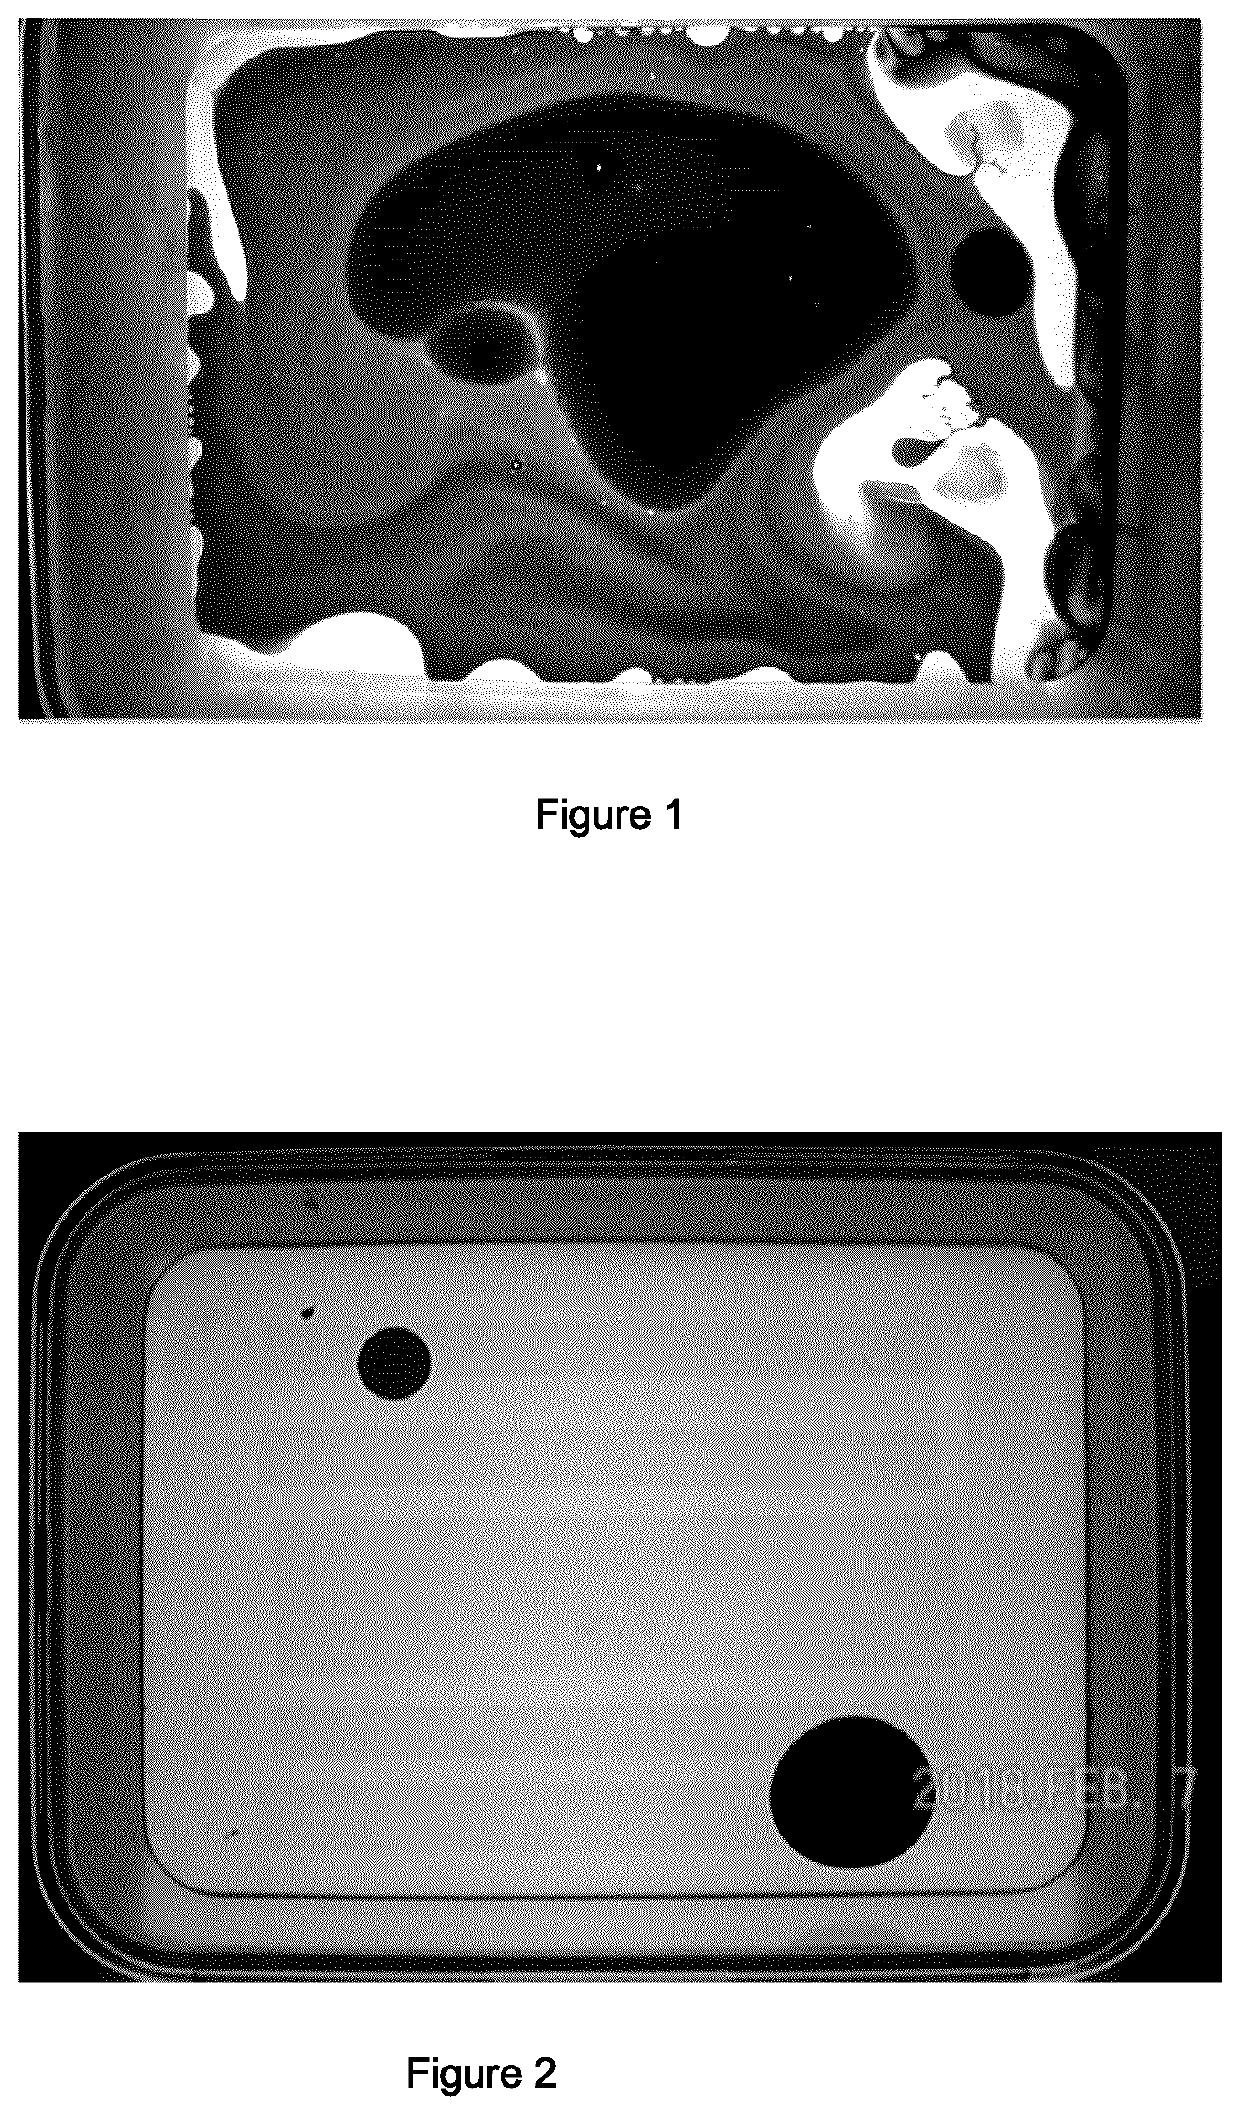 Products and methods for the treatment of mixtures of water and hydrophobic liquids